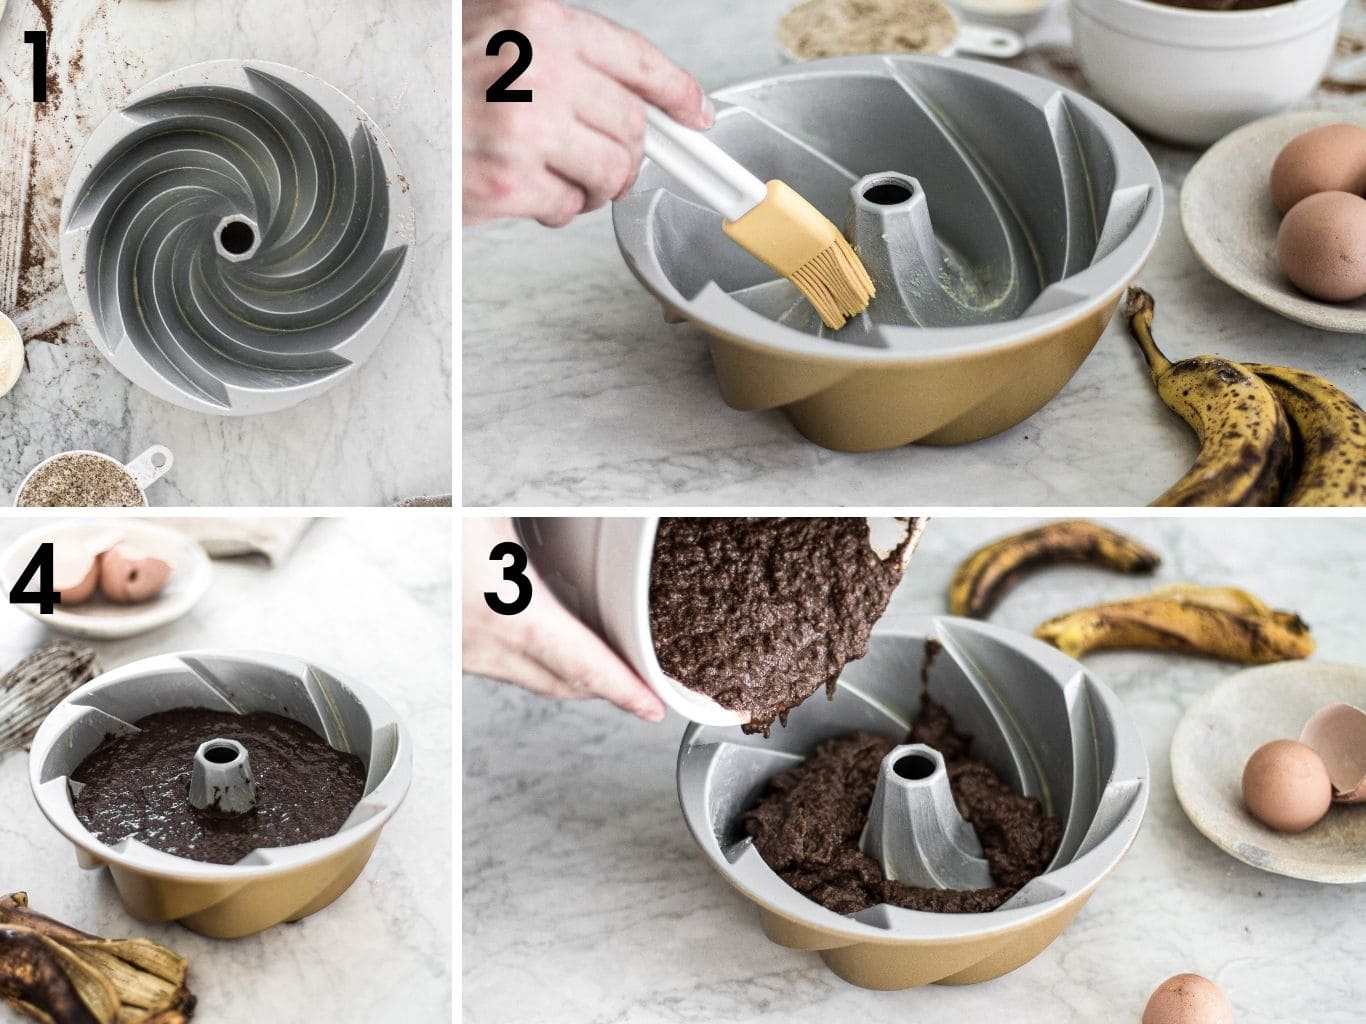 Steps showing how to make batter for Chocolate Banana Paleo Cake, placing it in a buttered pinwheel bundt cake pan- from verygoodcook.com